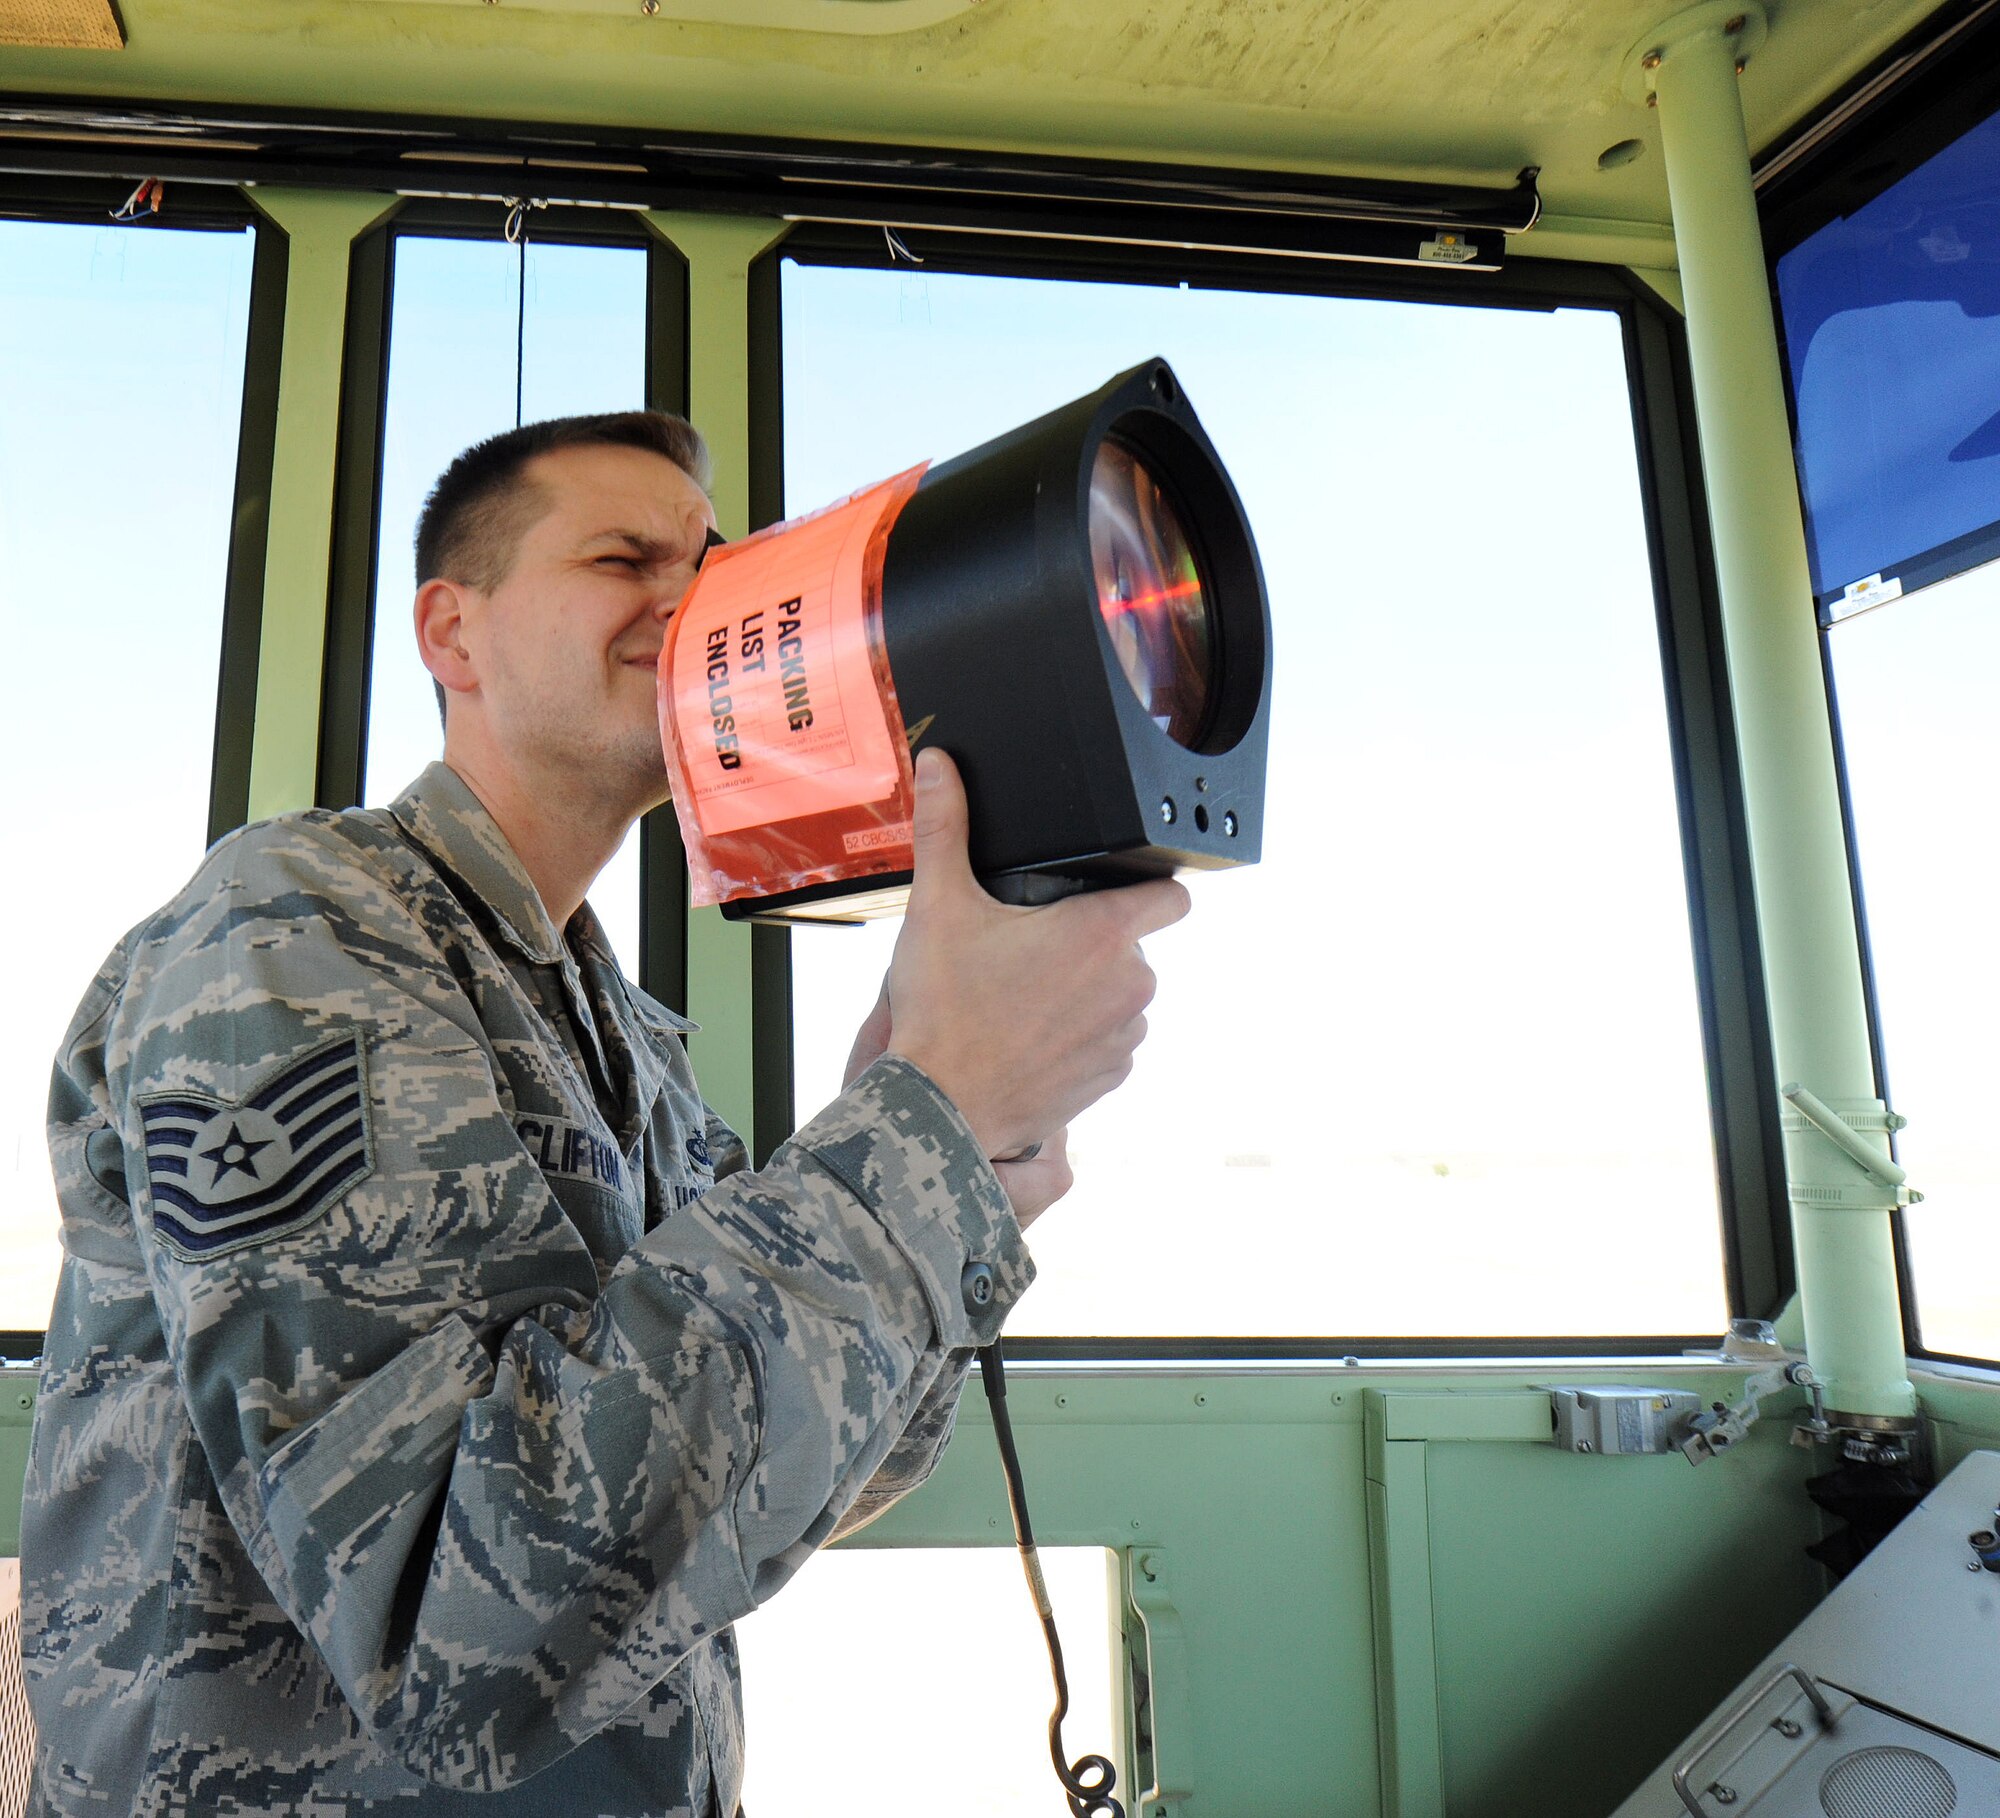 Tech. Sgt. Joshua Clifton, 54th CBCS air traffic control watch supervisor, aims a signal light from inside a mobile tower at the Perry-Houston County Airport. The airport provided a training site for the squadron to communicate with private aircraft. (U.S. Air Force photo by Tommie Horton)